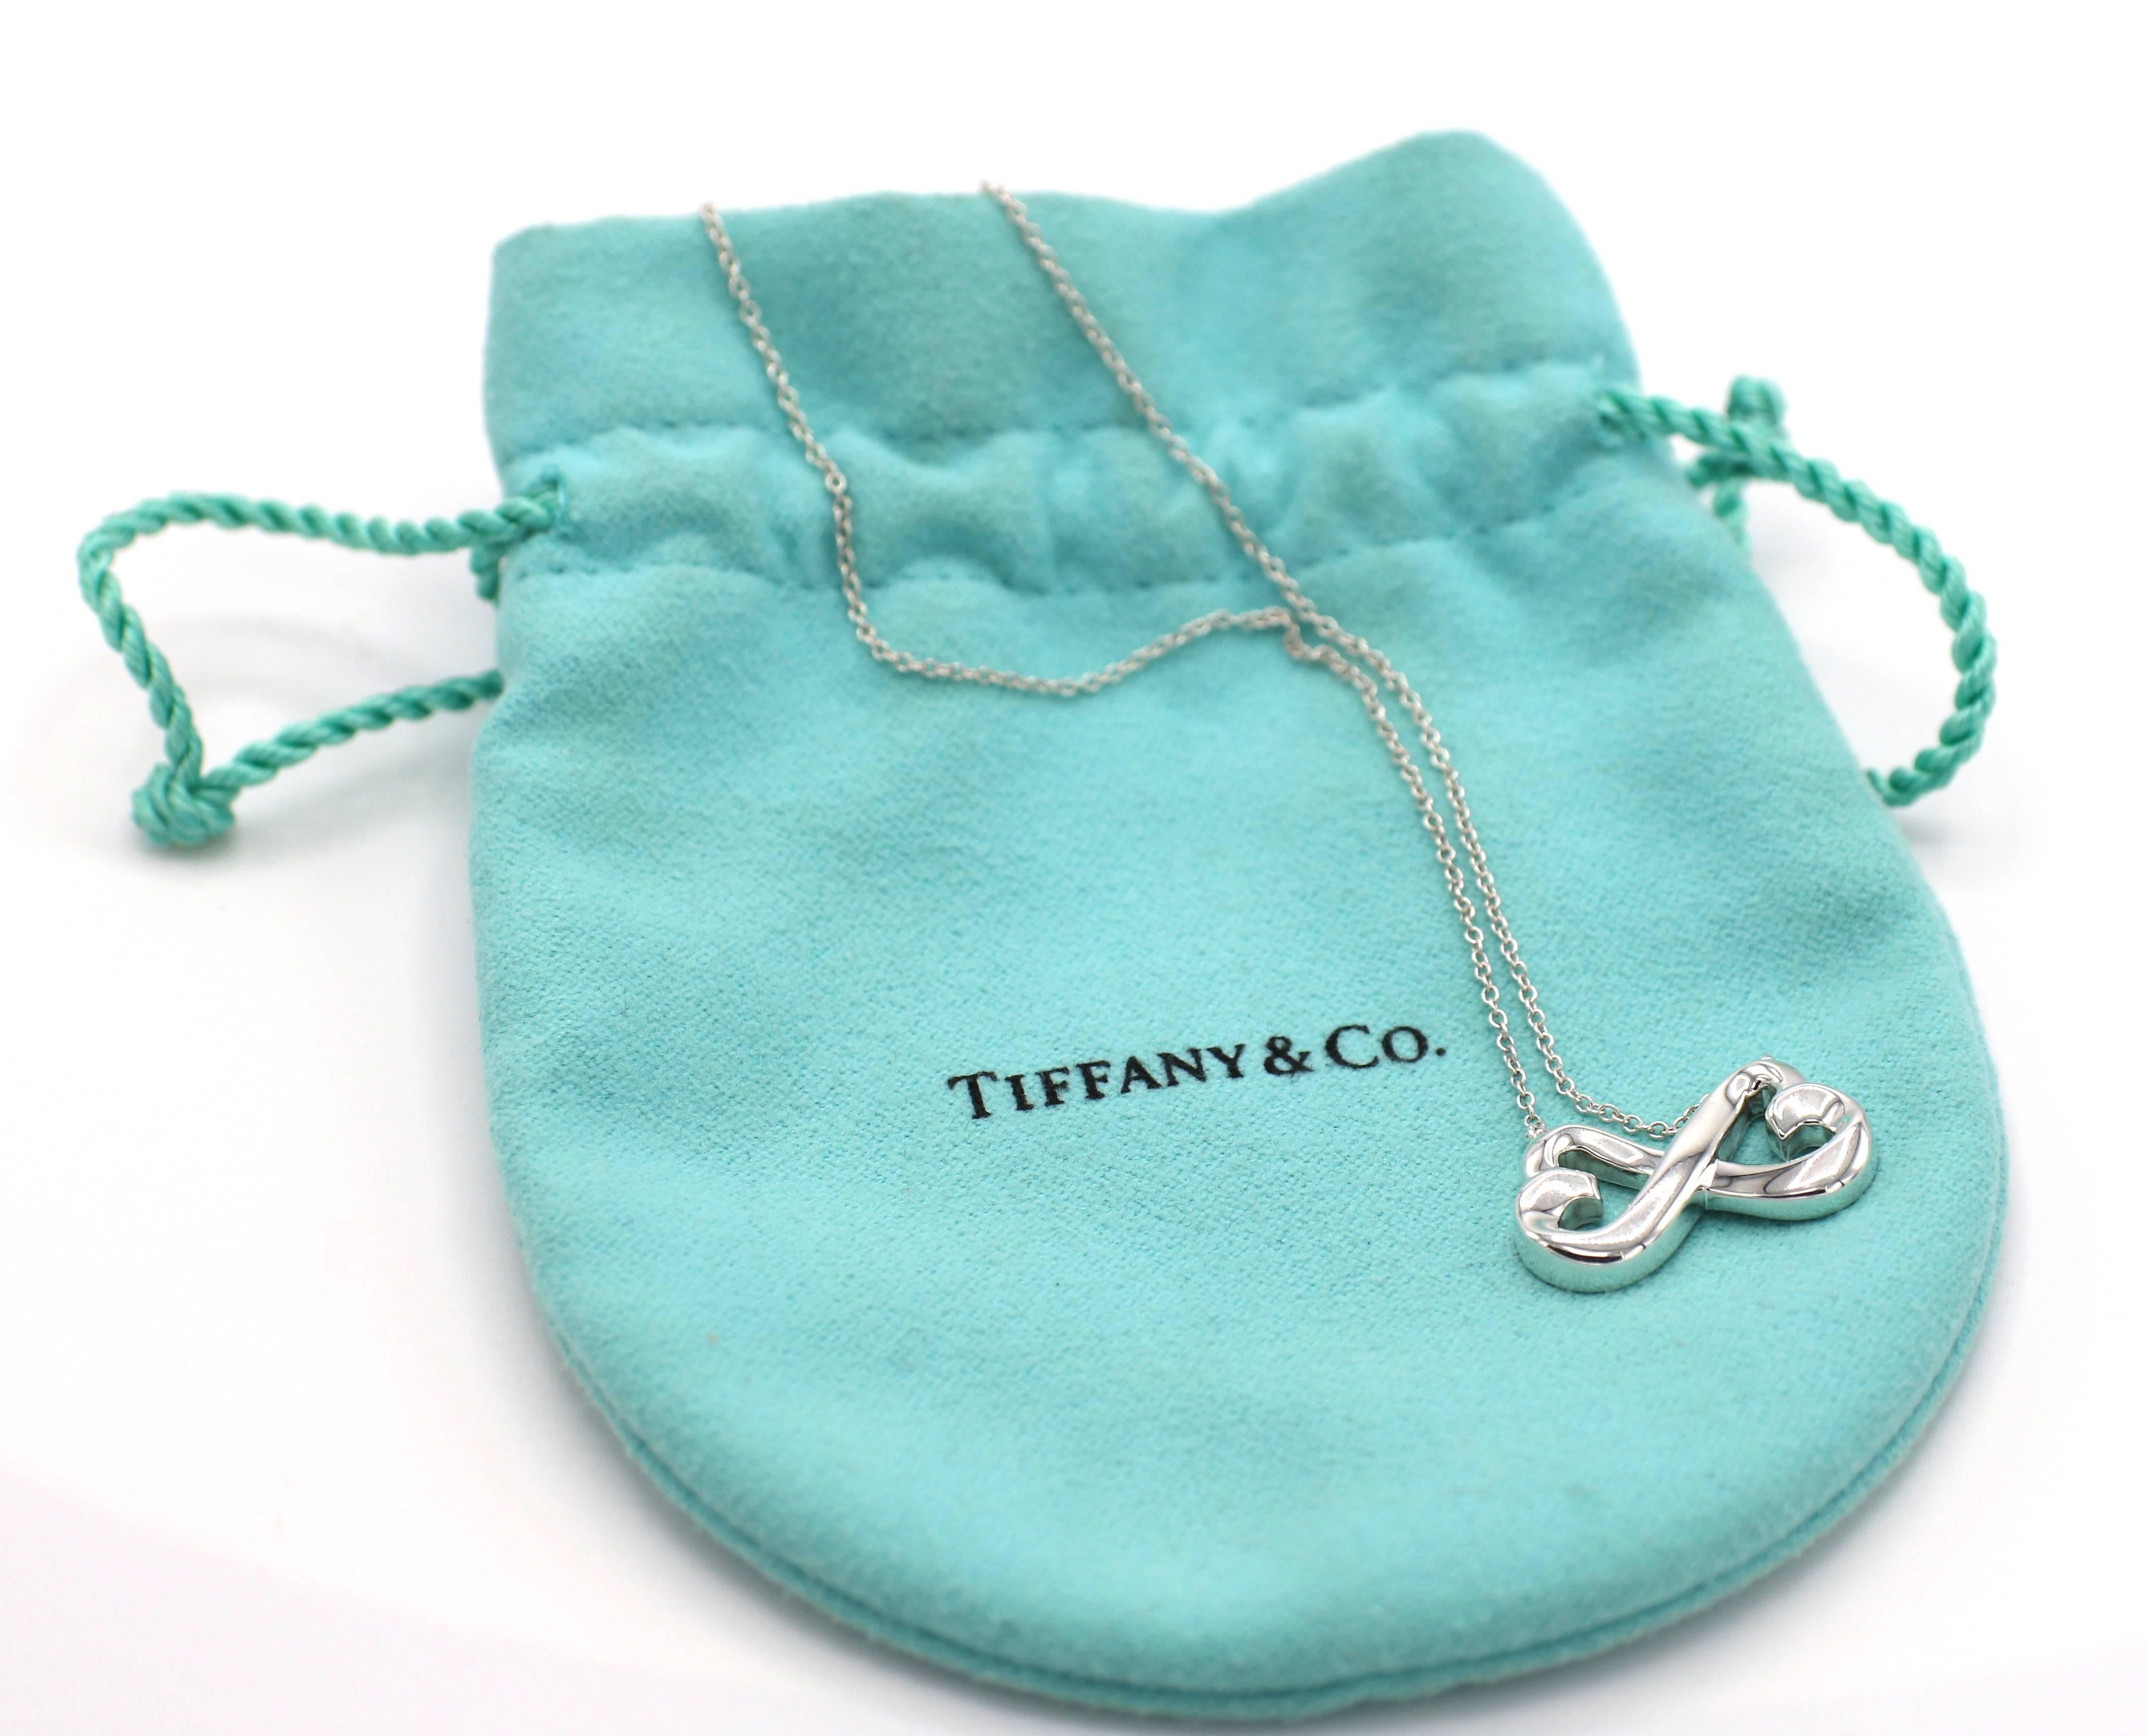 Women's Tiffany & Co. Paloma Picasso Double Loving Heart Sterling Silver Necklace